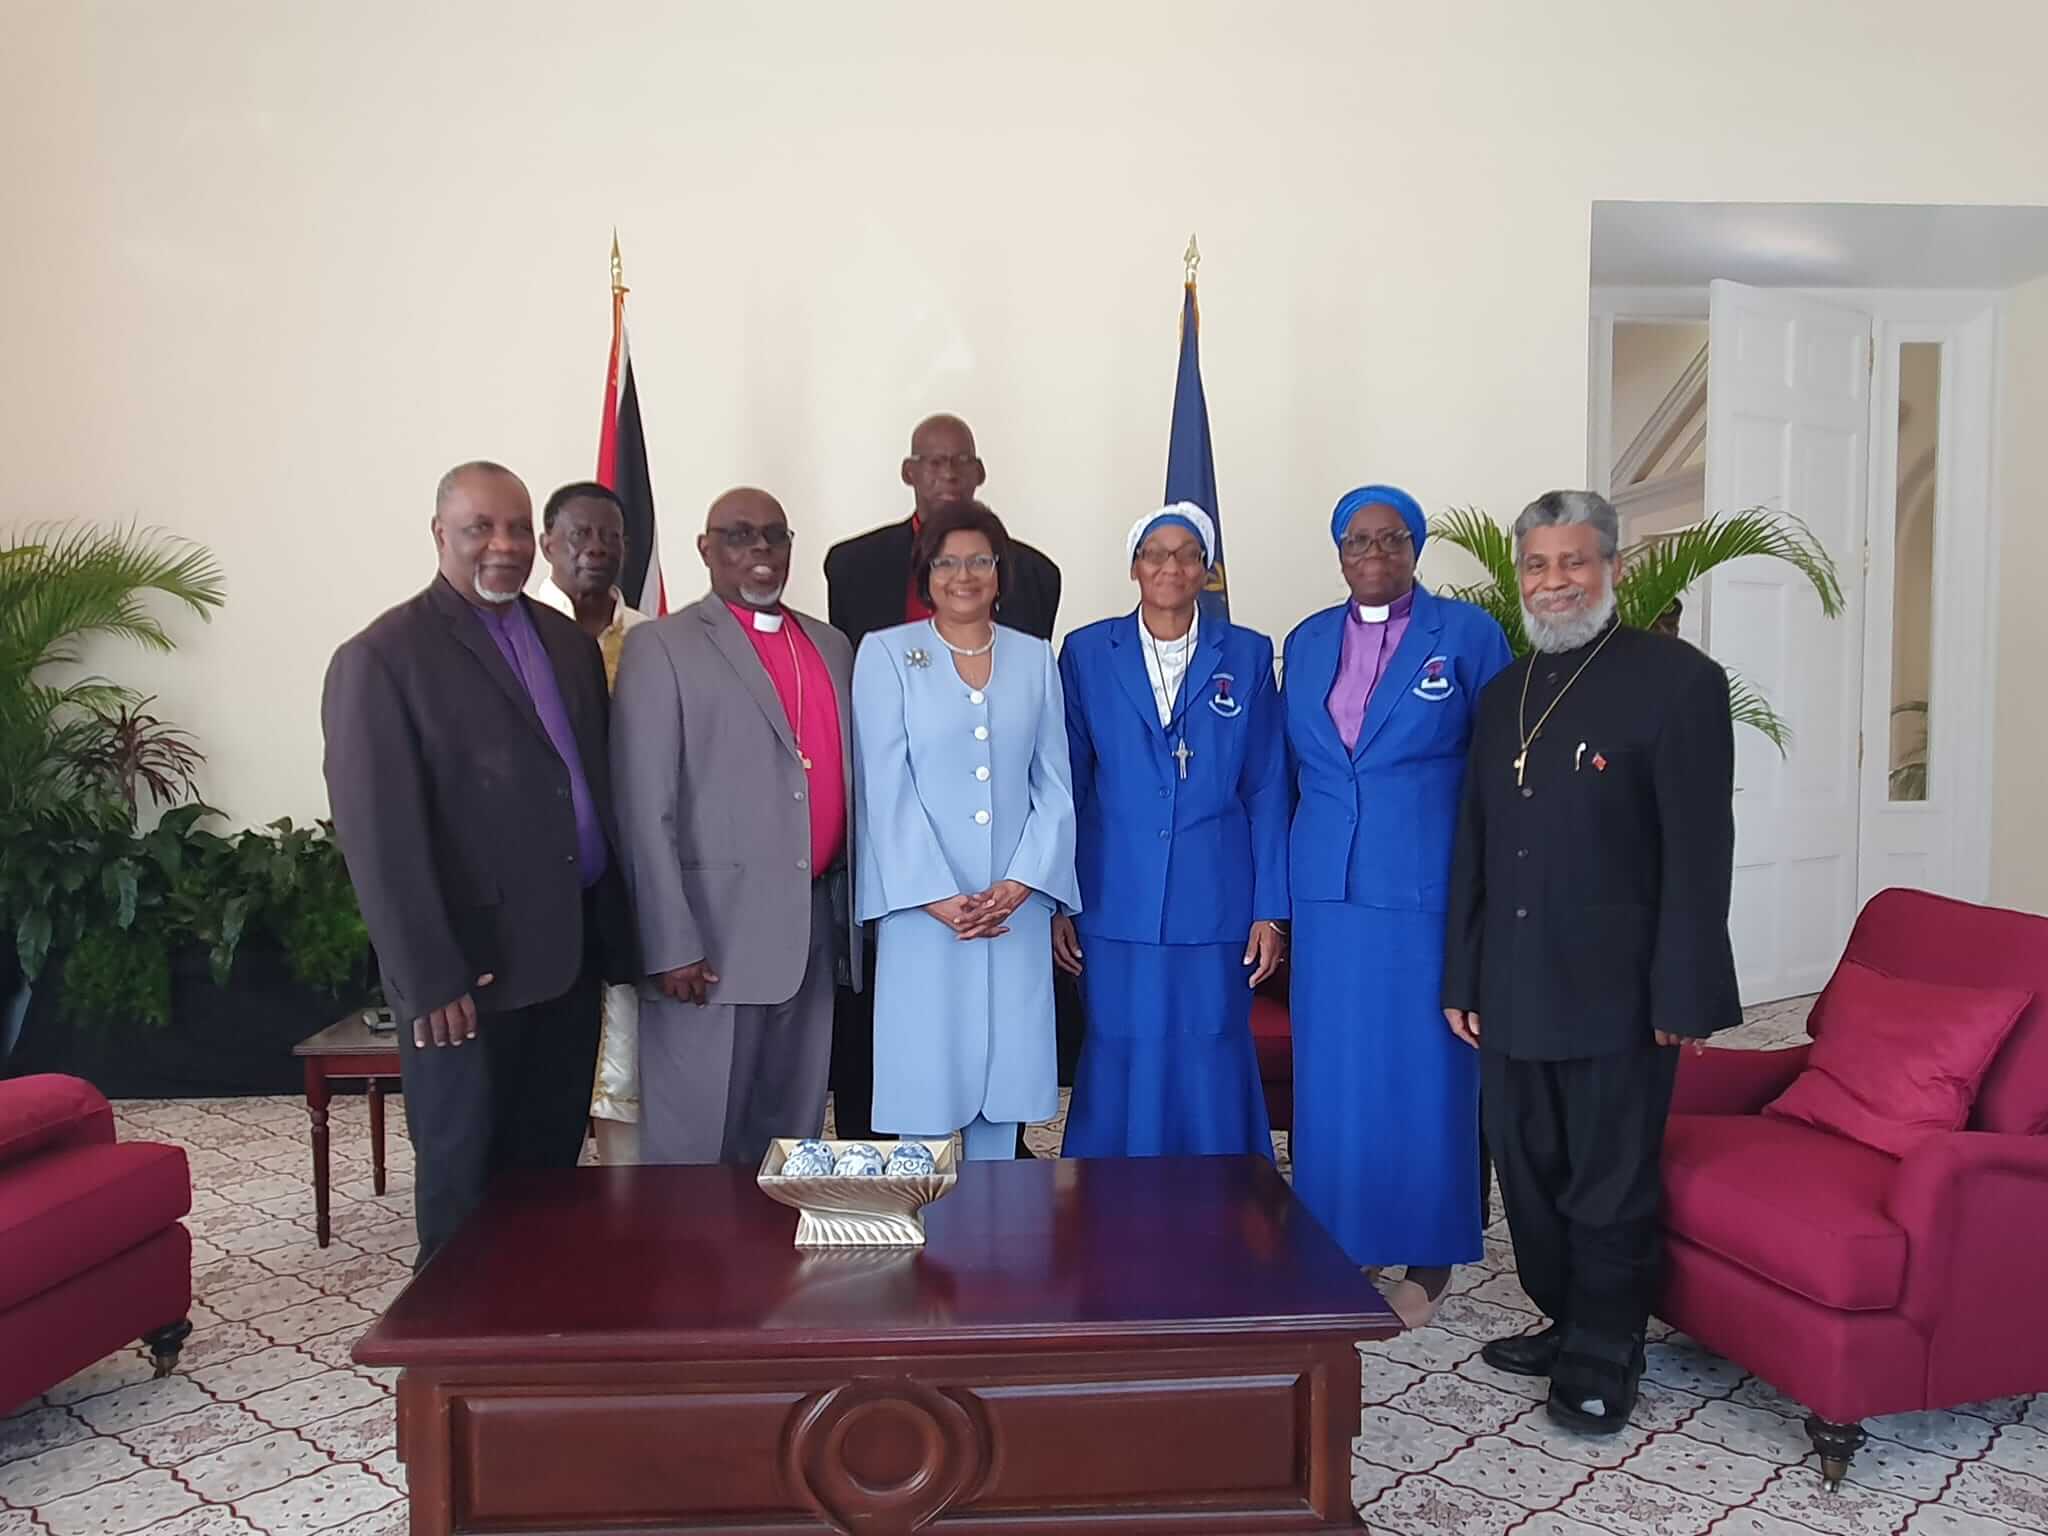 Her Excellency receives The National Congress of Incorporated Spiritual Baptist Organisations of Trinidad and Tobago